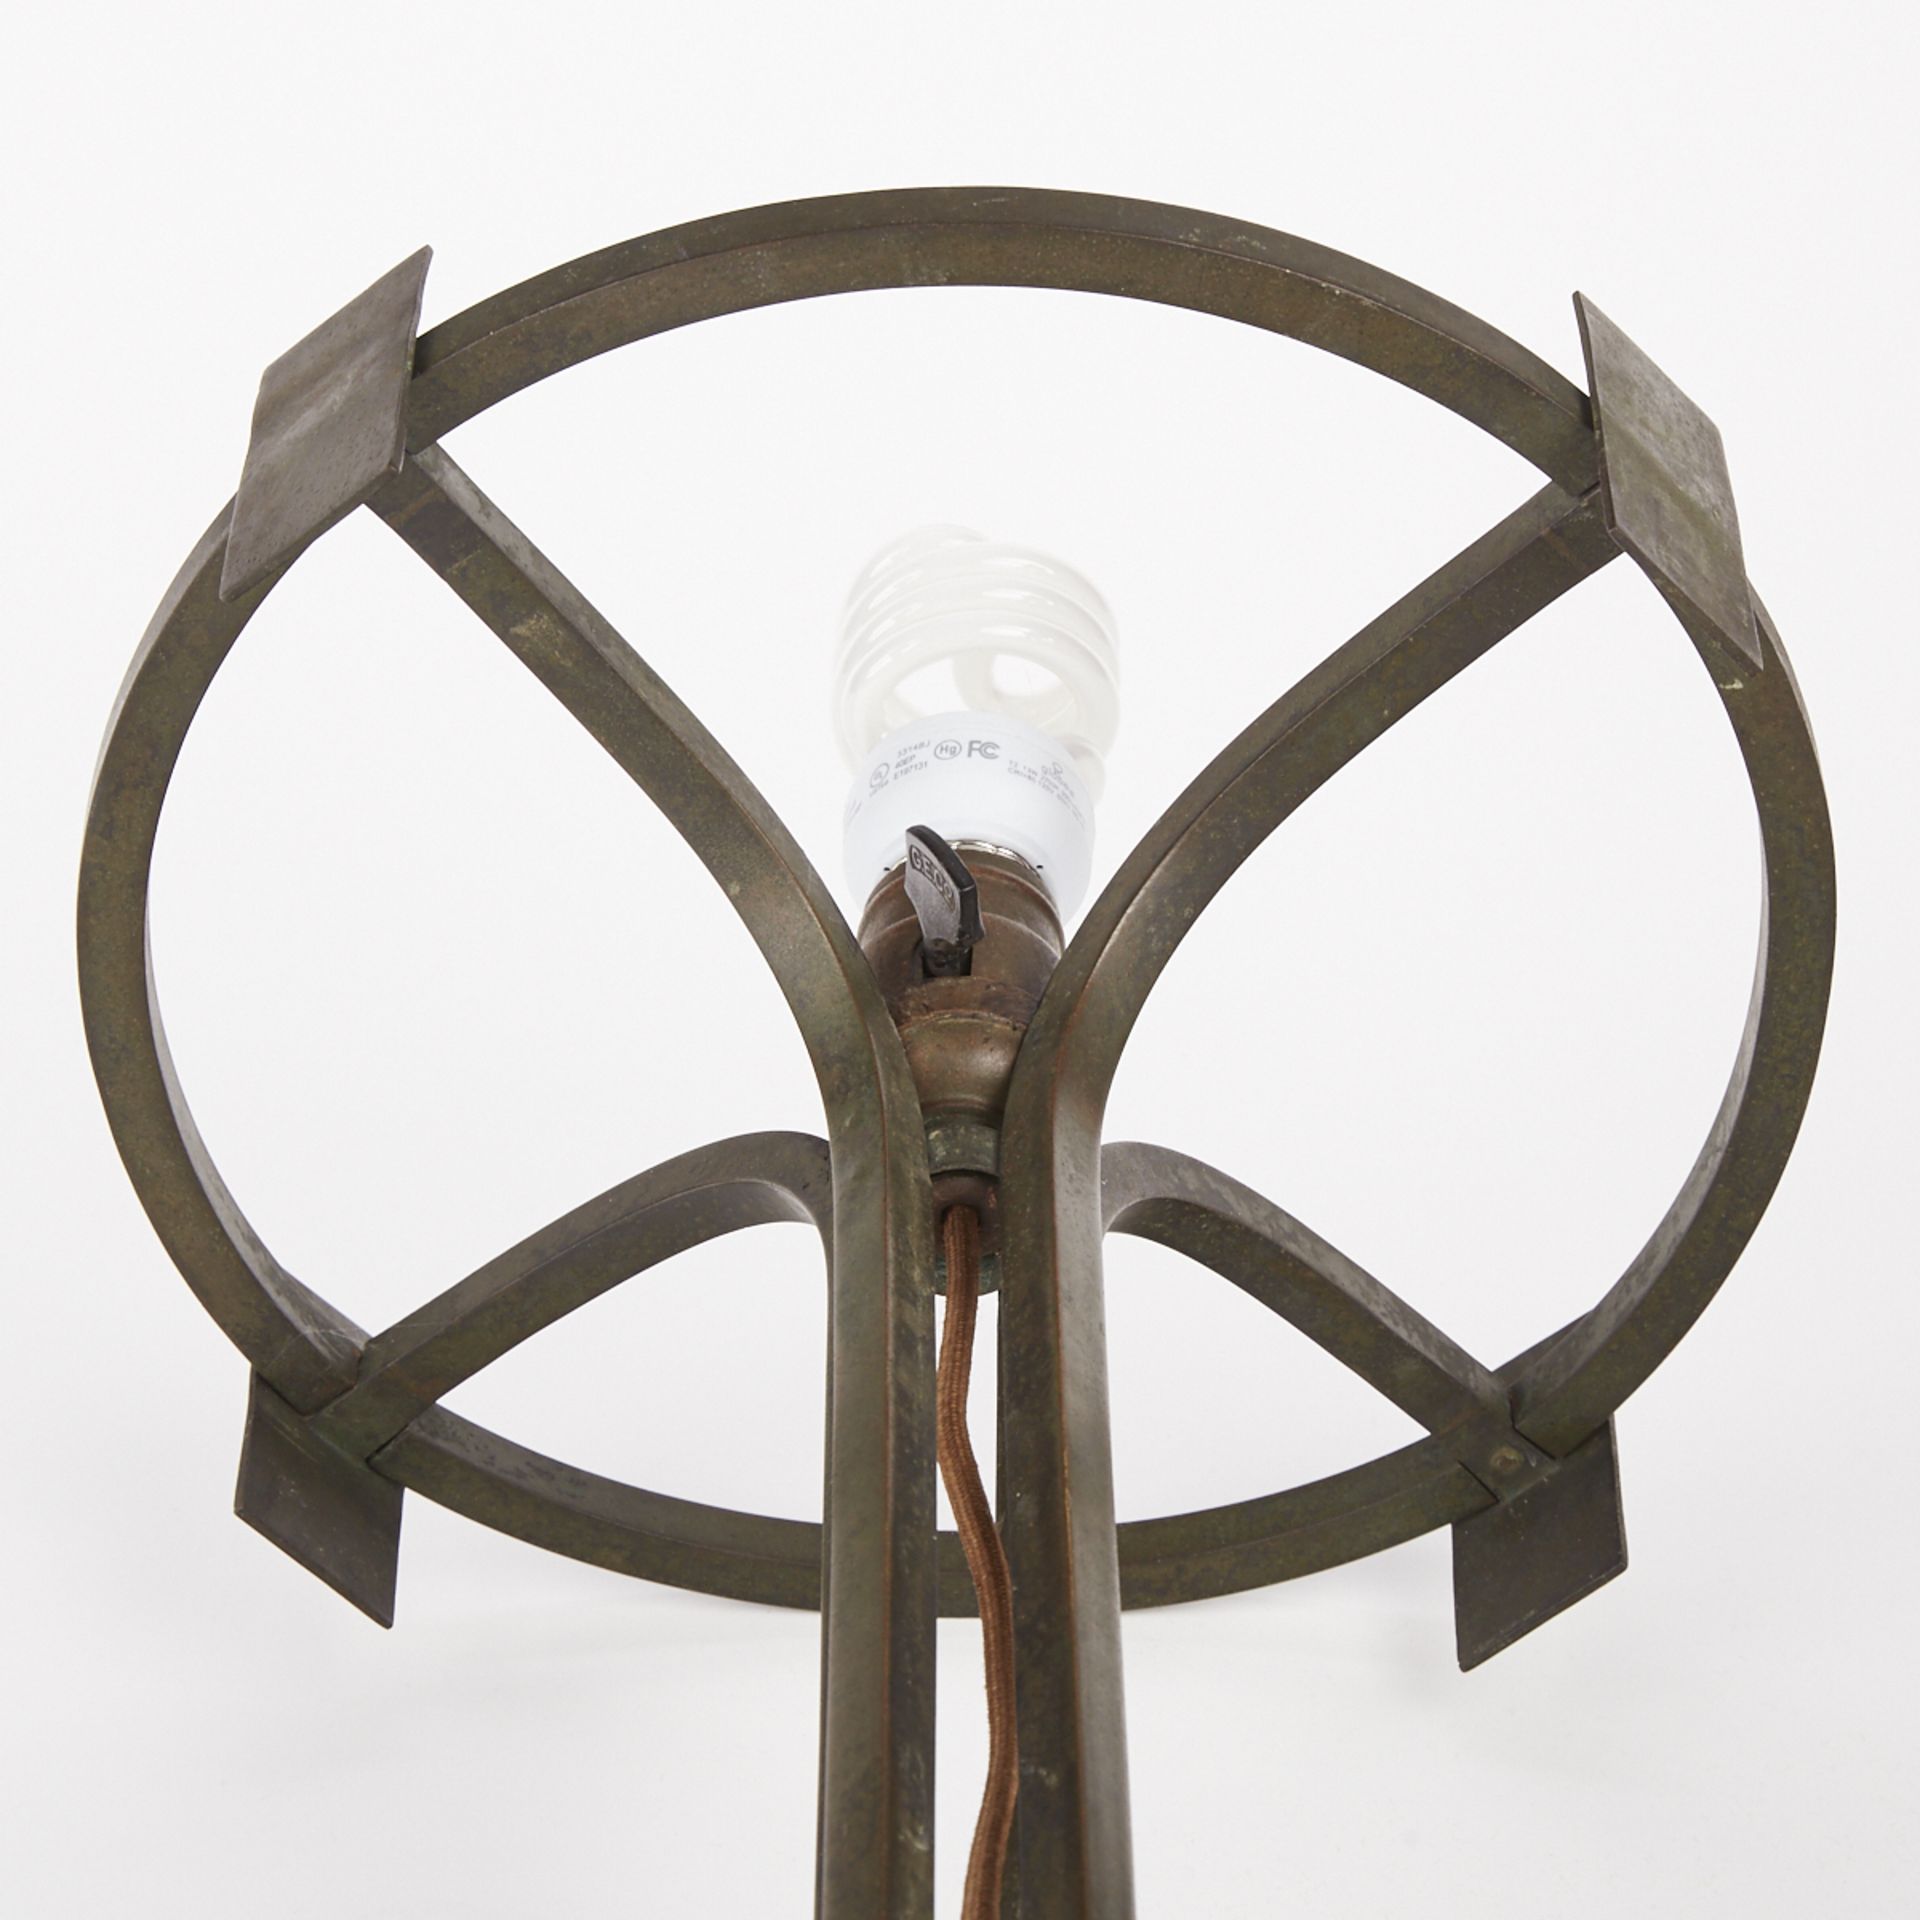 Early 20th c. Secessionist Dome Desk Lamp Mkd Germany - Image 6 of 7